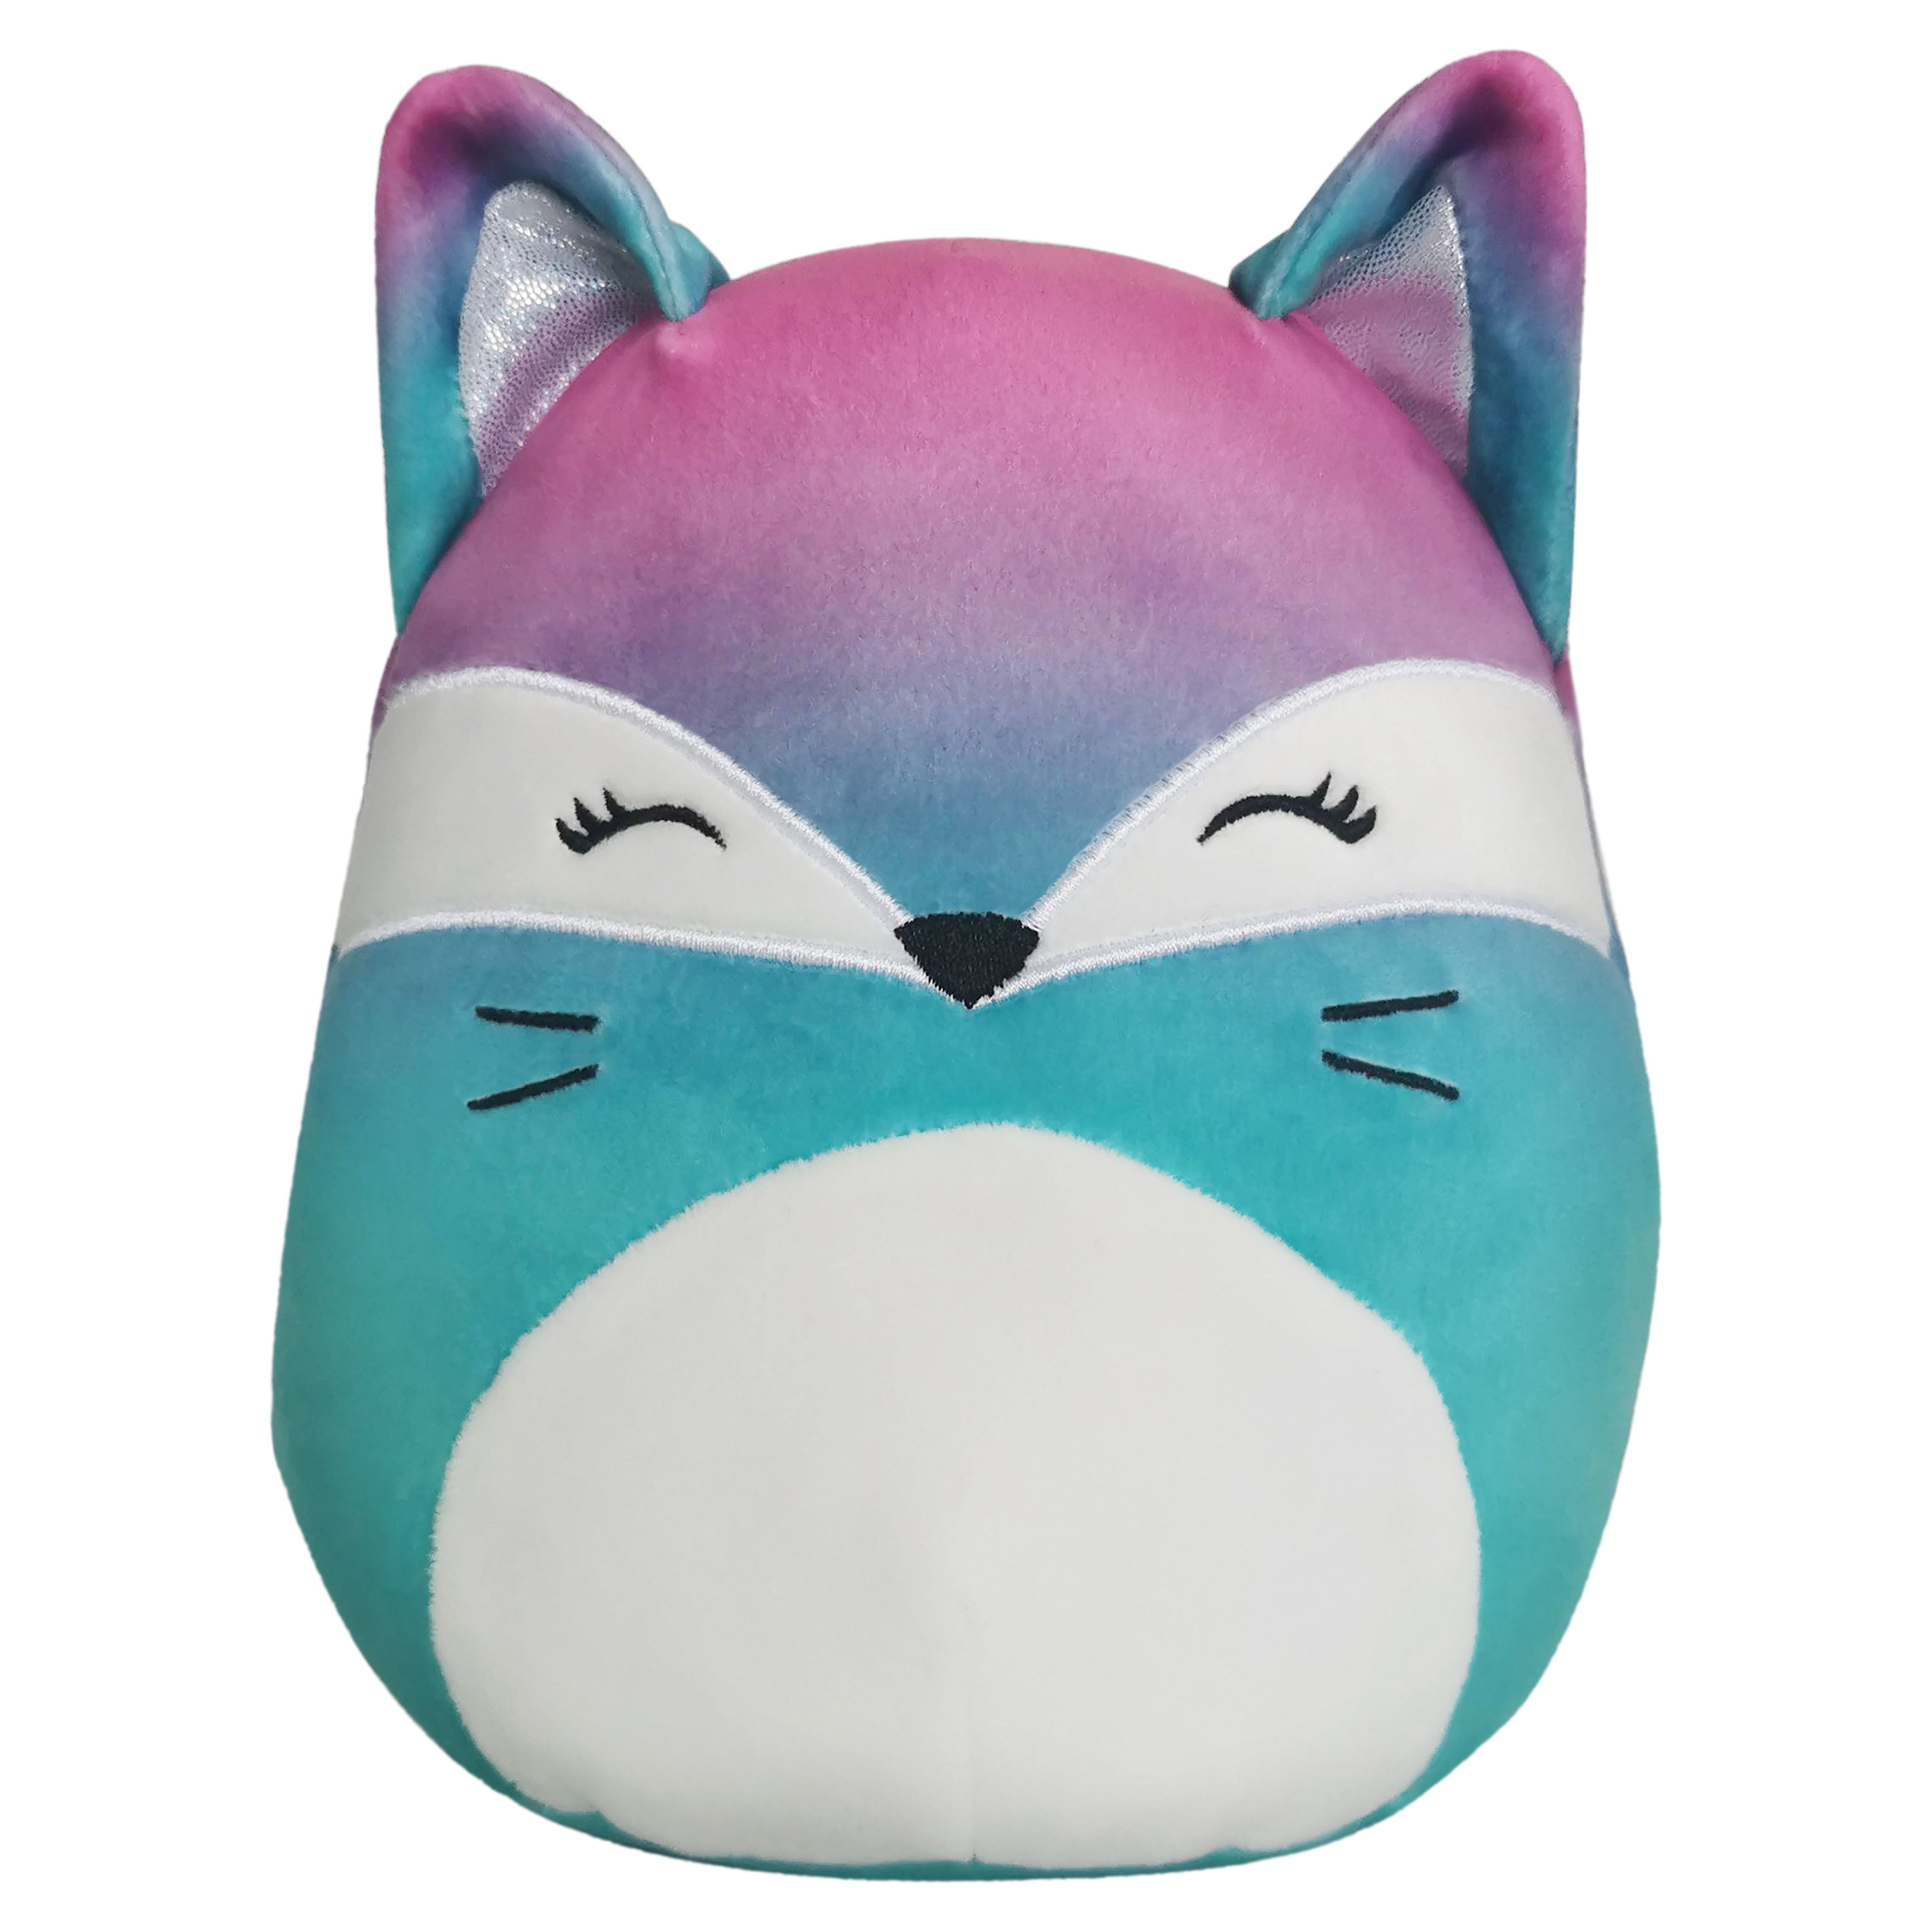 Squishmallows Official Kellytoy Plush 7.5 inch Pink And Blue Fox